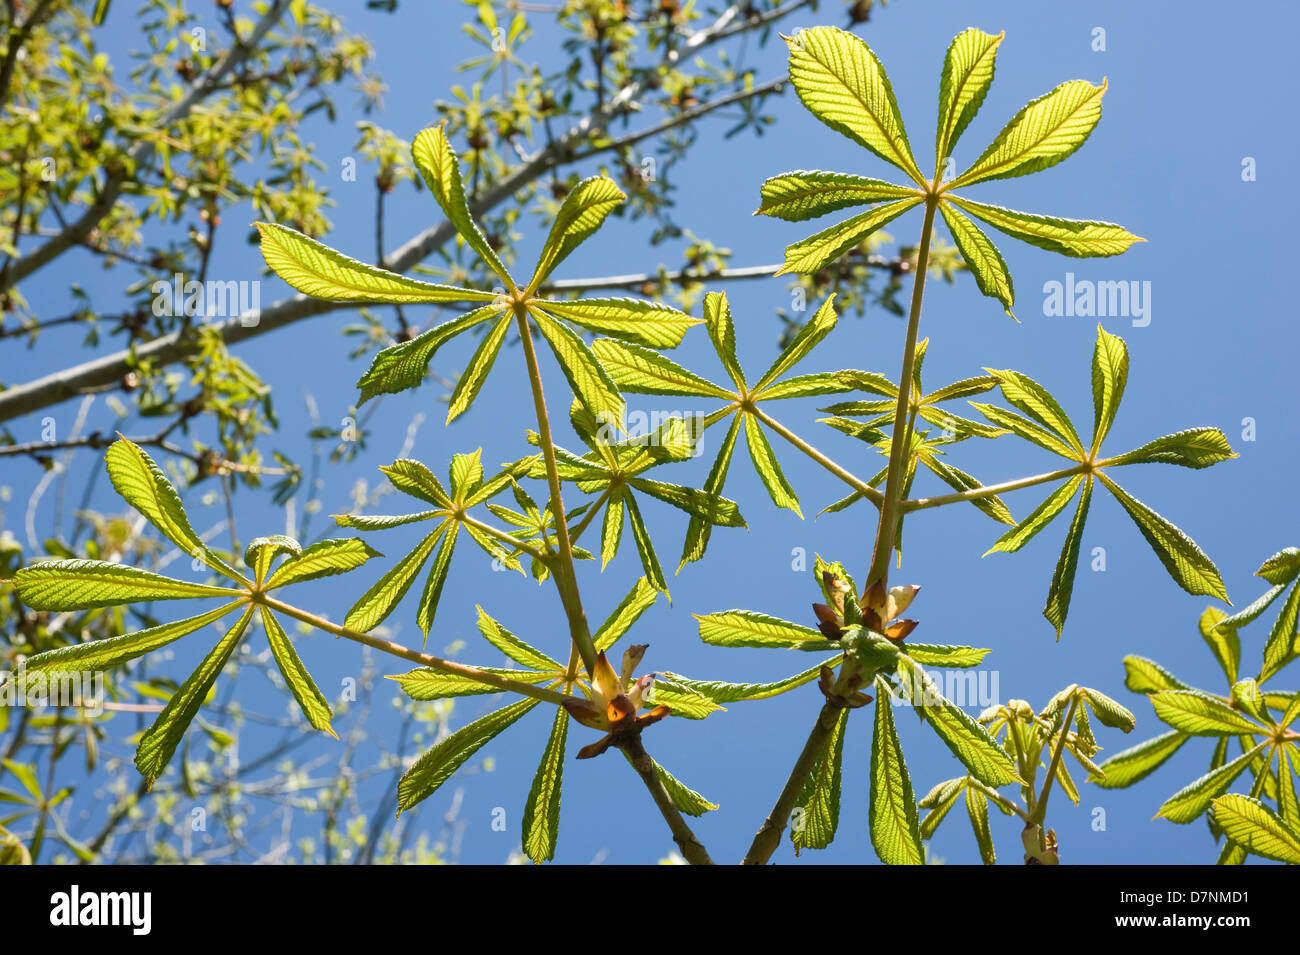 Young leaves on a horse chestnut, Aesculus hippocastanum, tree against blue sky in spring Stock Photo